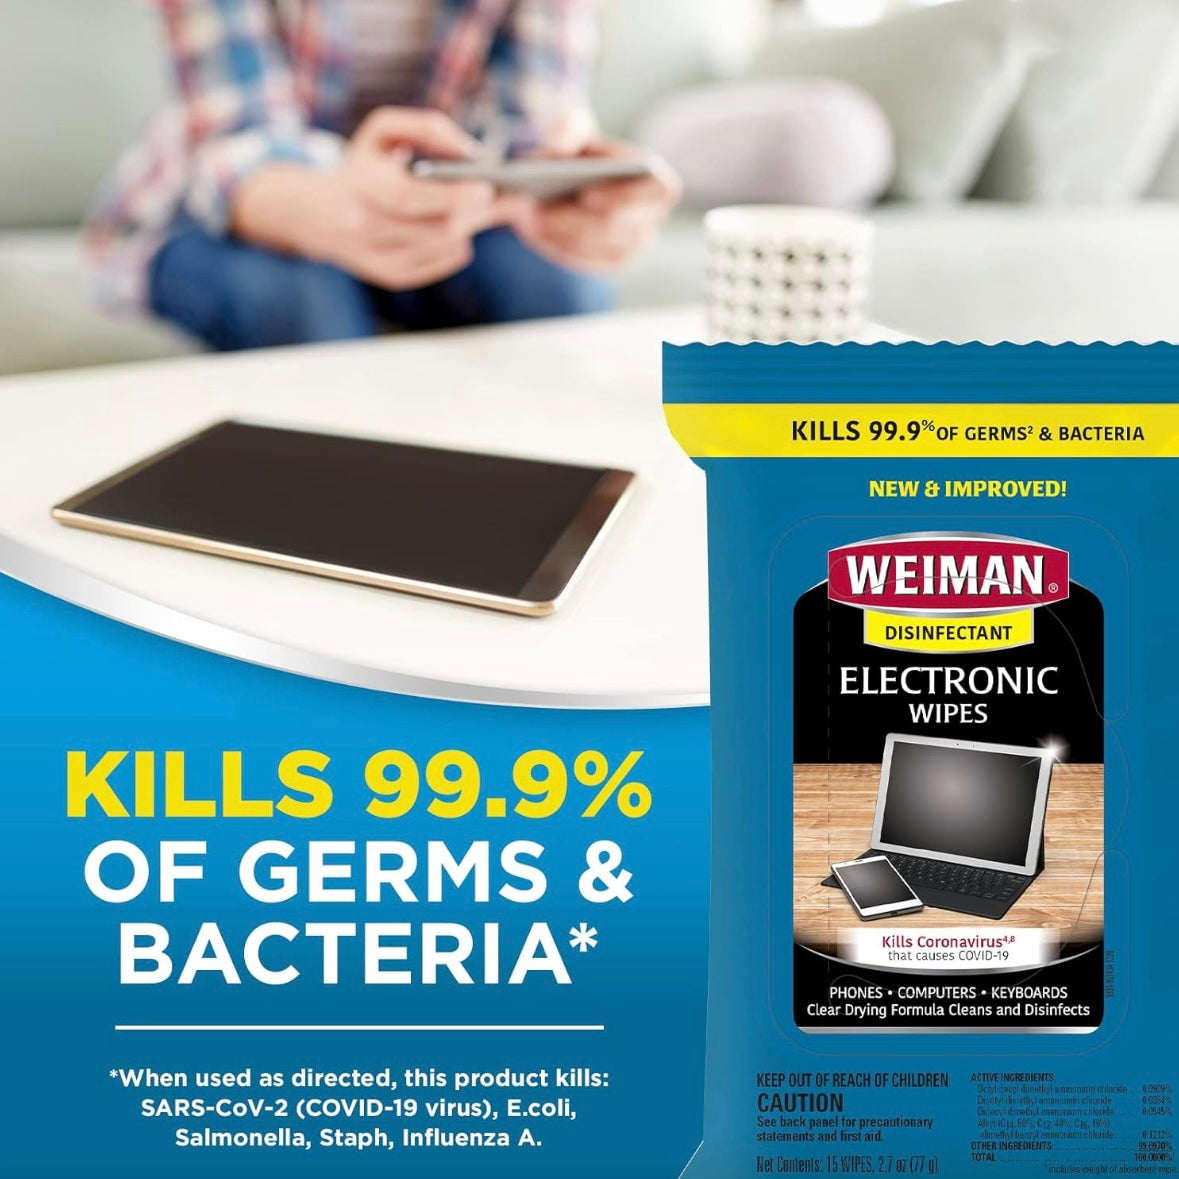 8" Weiman Electronic Phone And Computer Disinfectant Wipes - Great for Keyboards!